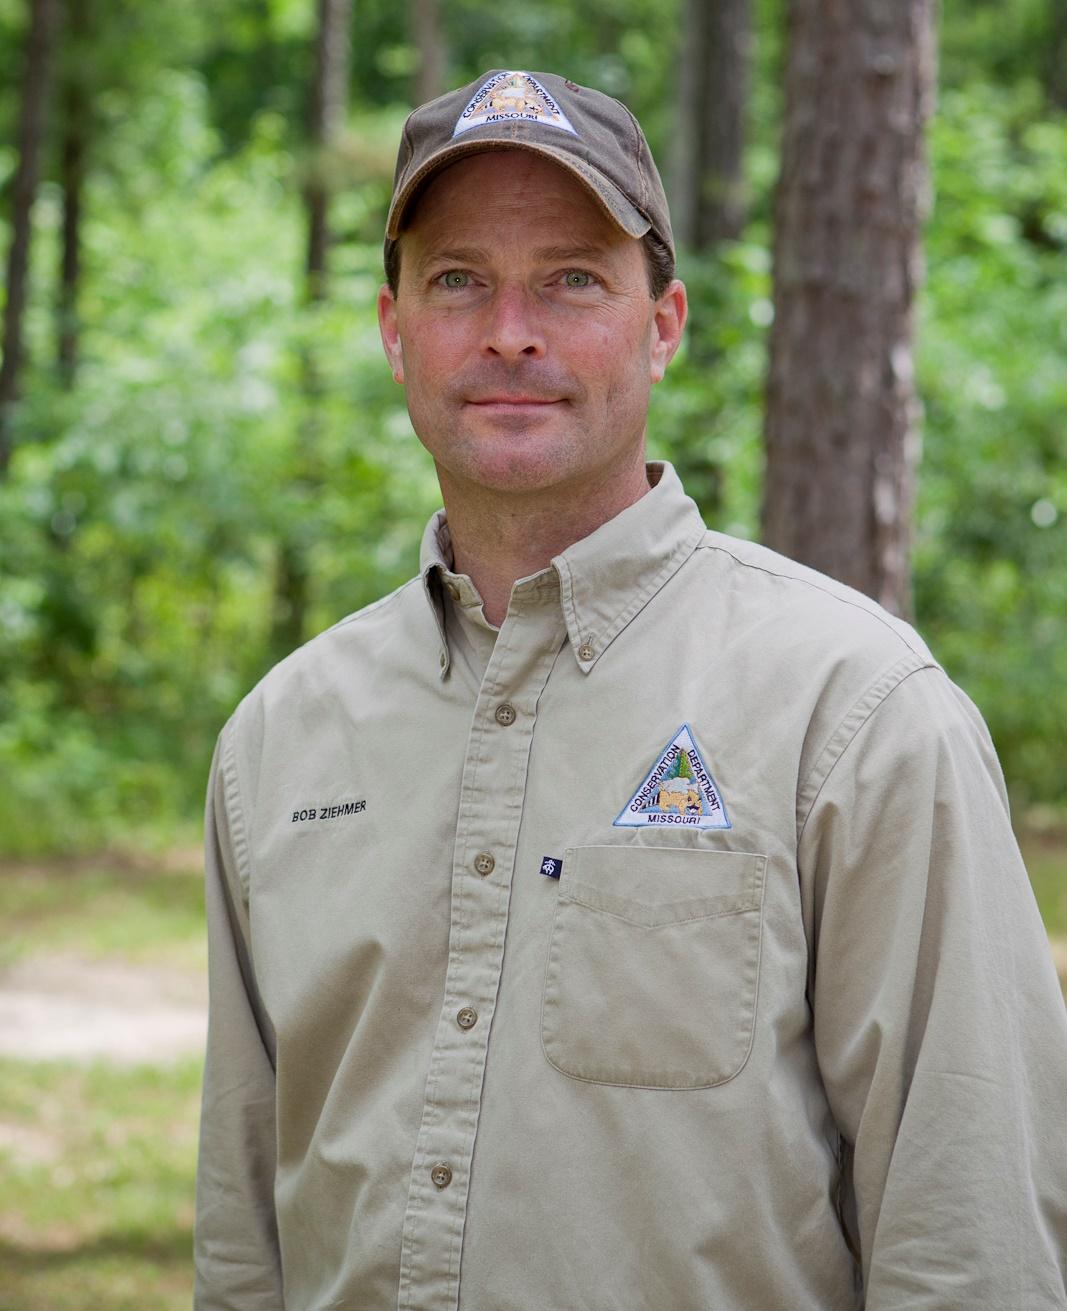 Missouri Conservation Director Leaving For Private Sector Job KBIA